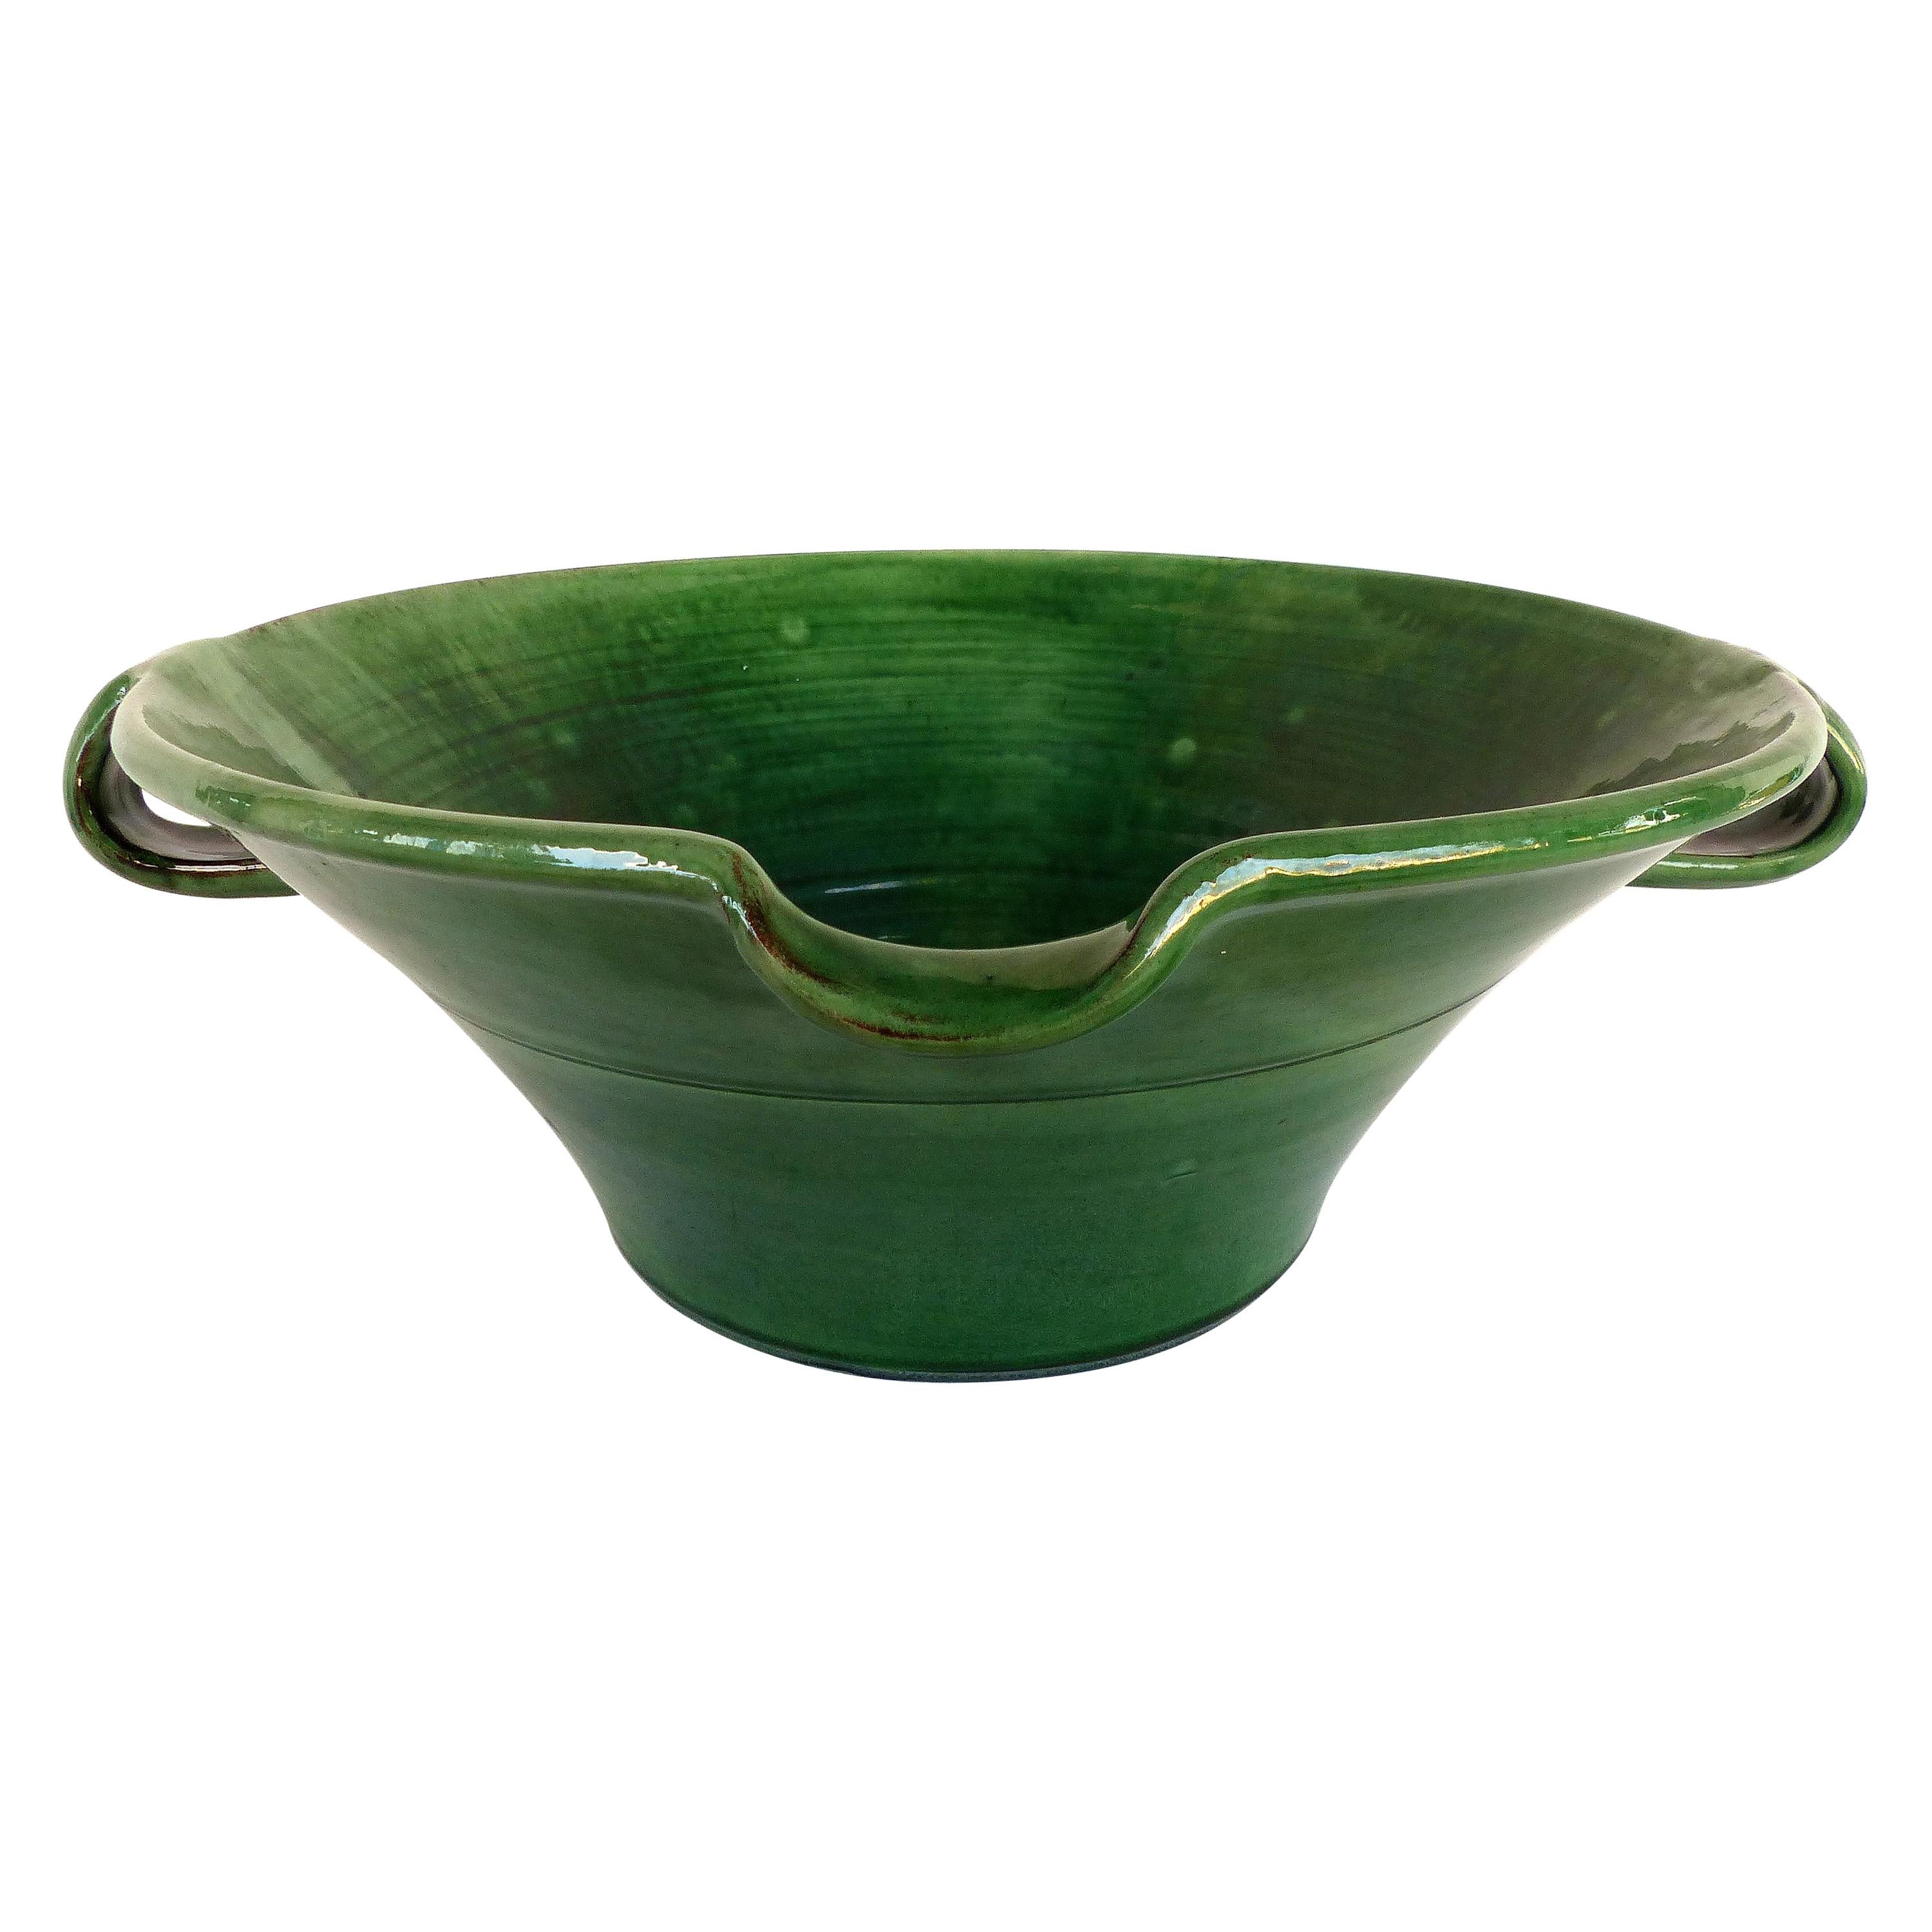 Large Green Glazed French Terracotta Two Handled Vessel with Spout